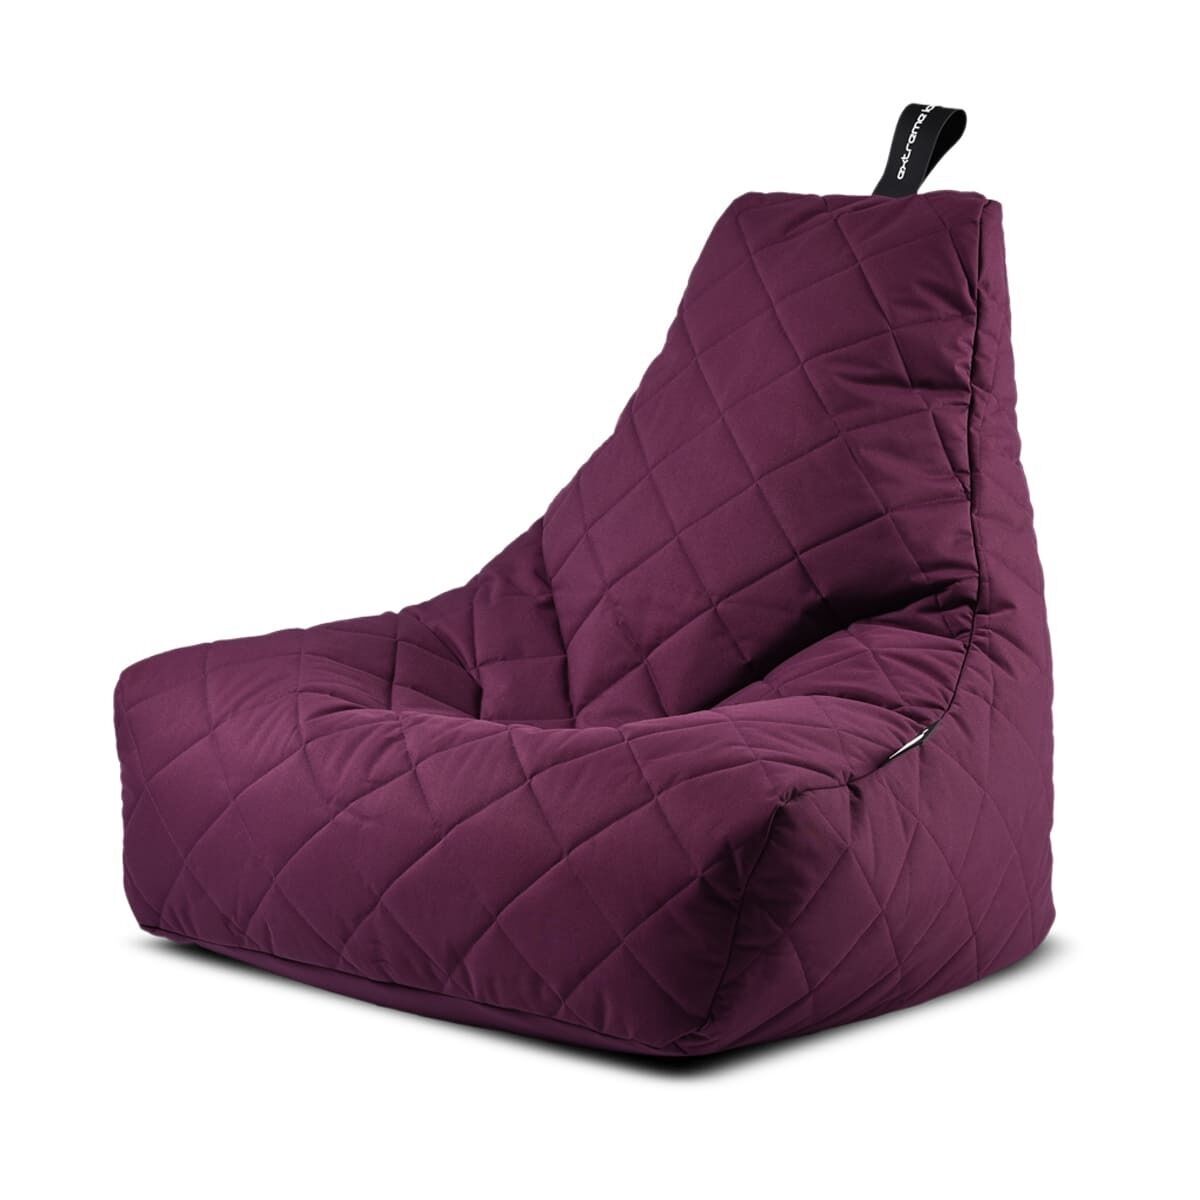 Extreme Lounging - Mighty Quilted Bean Bag - Berry product image